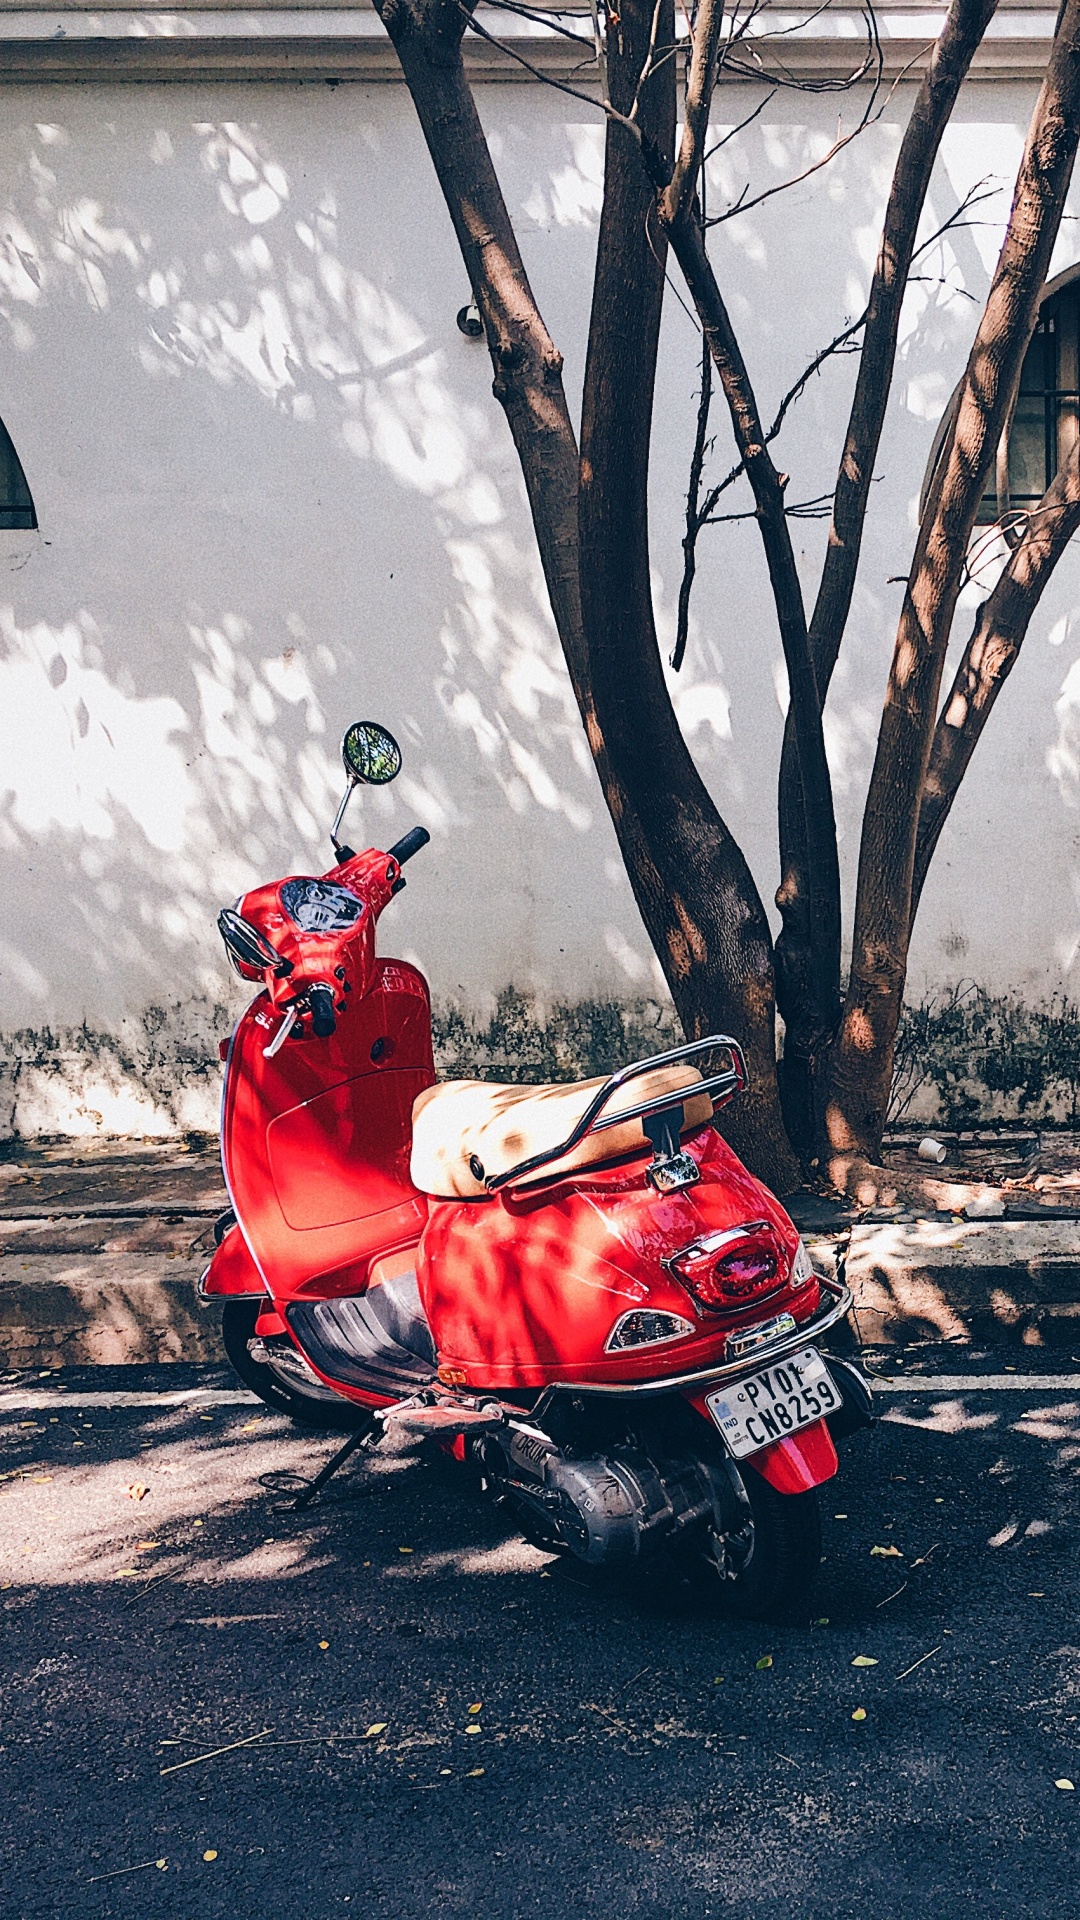 Man in Red Jacket Riding Red Motor Scooter on Road During Daytime. Wallpaper in 1080x1920 Resolution